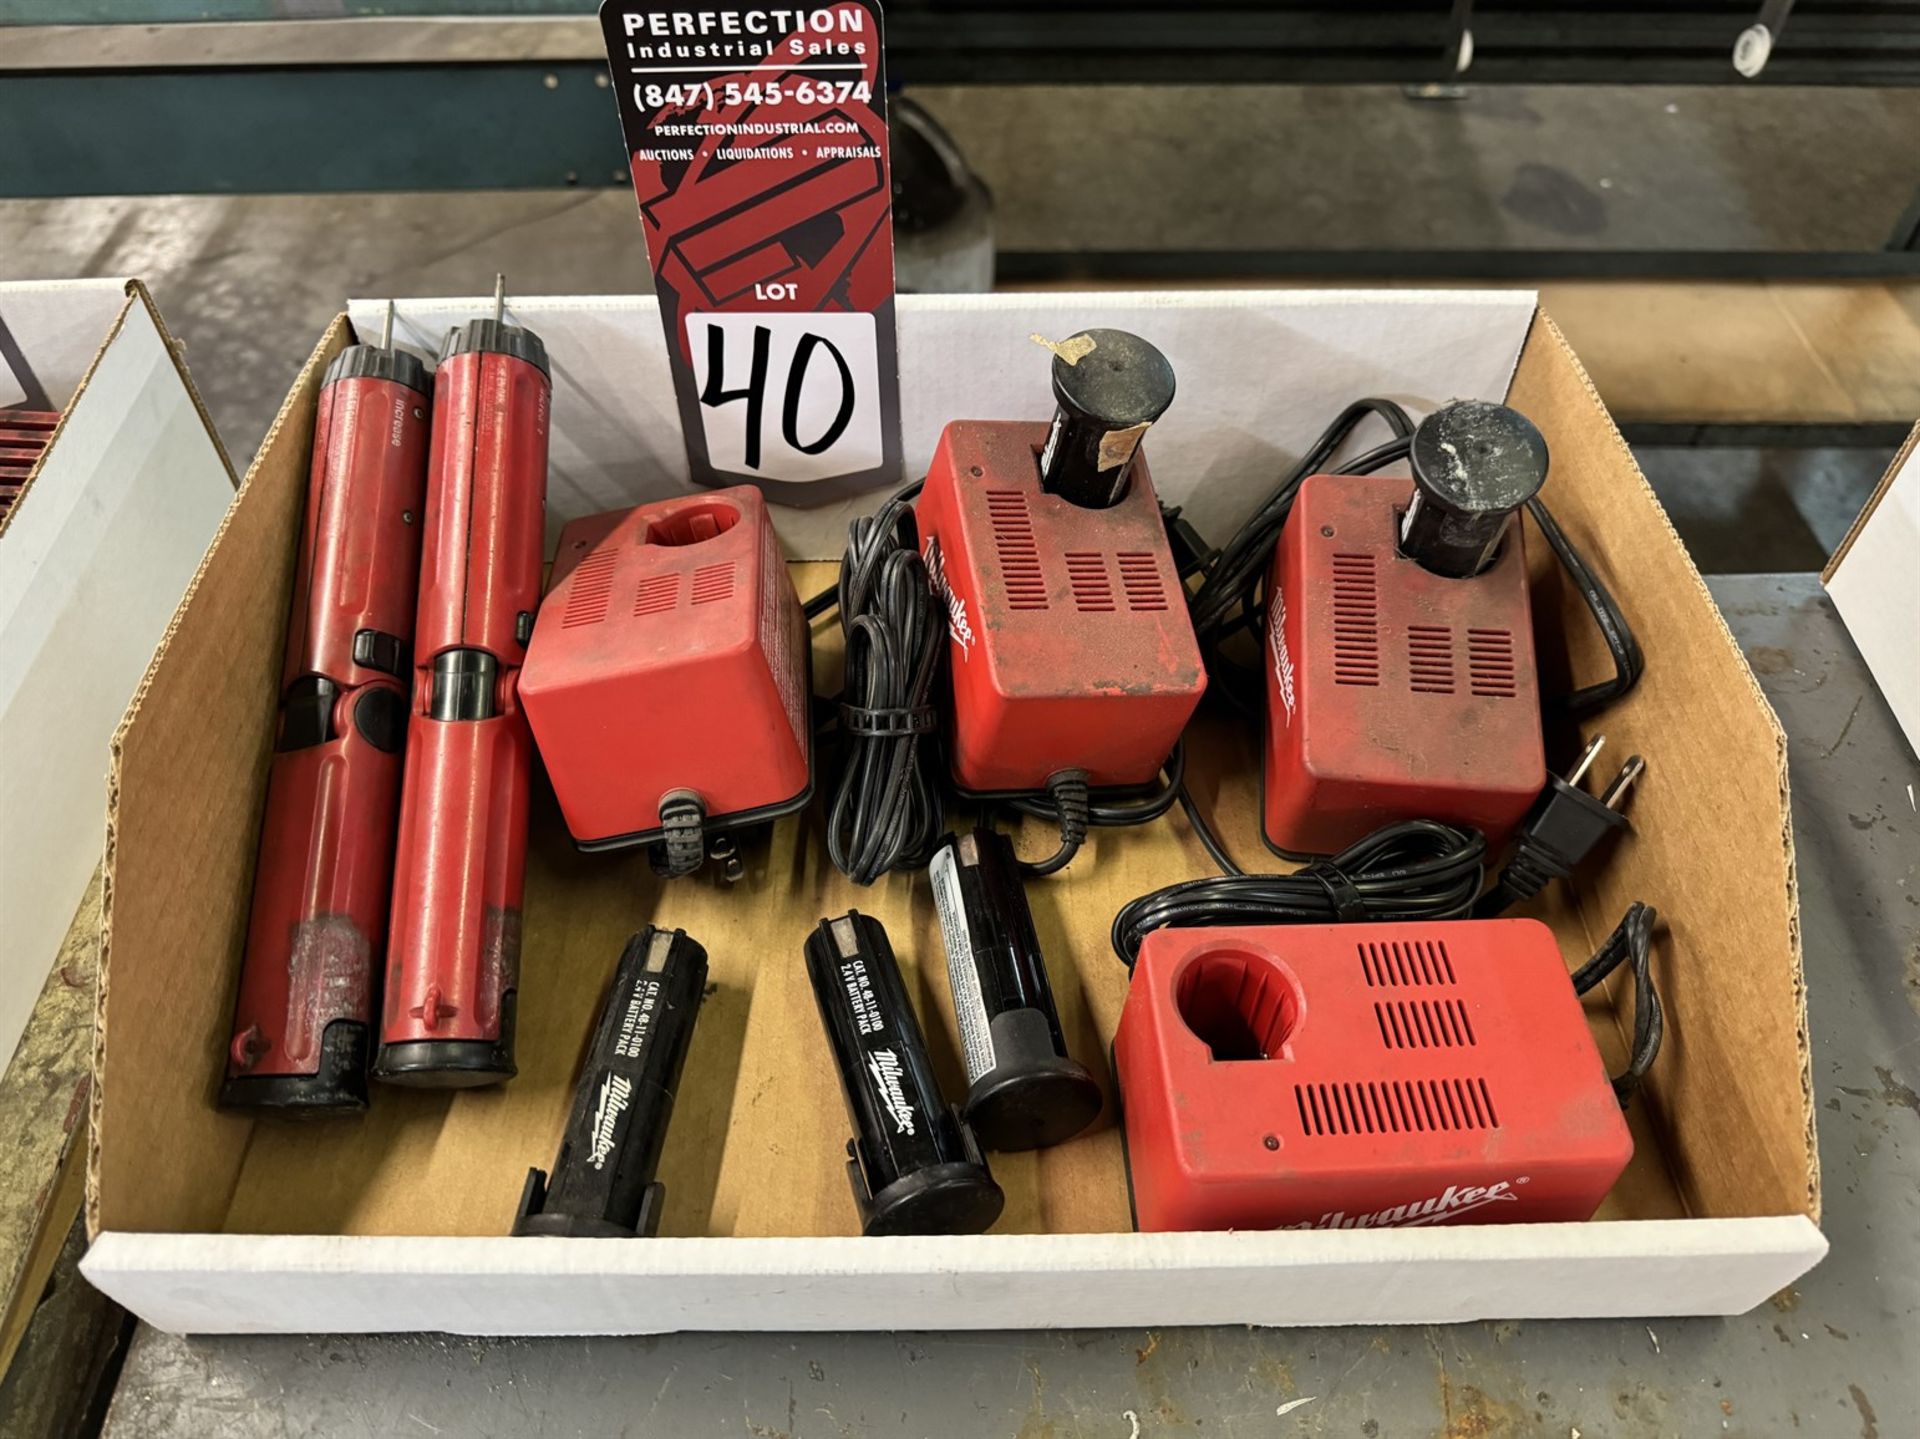 Lot Comprising (2) MILWAUKEE Cordless Screwdrivers w/ Battery and Charger (Machine Shop)